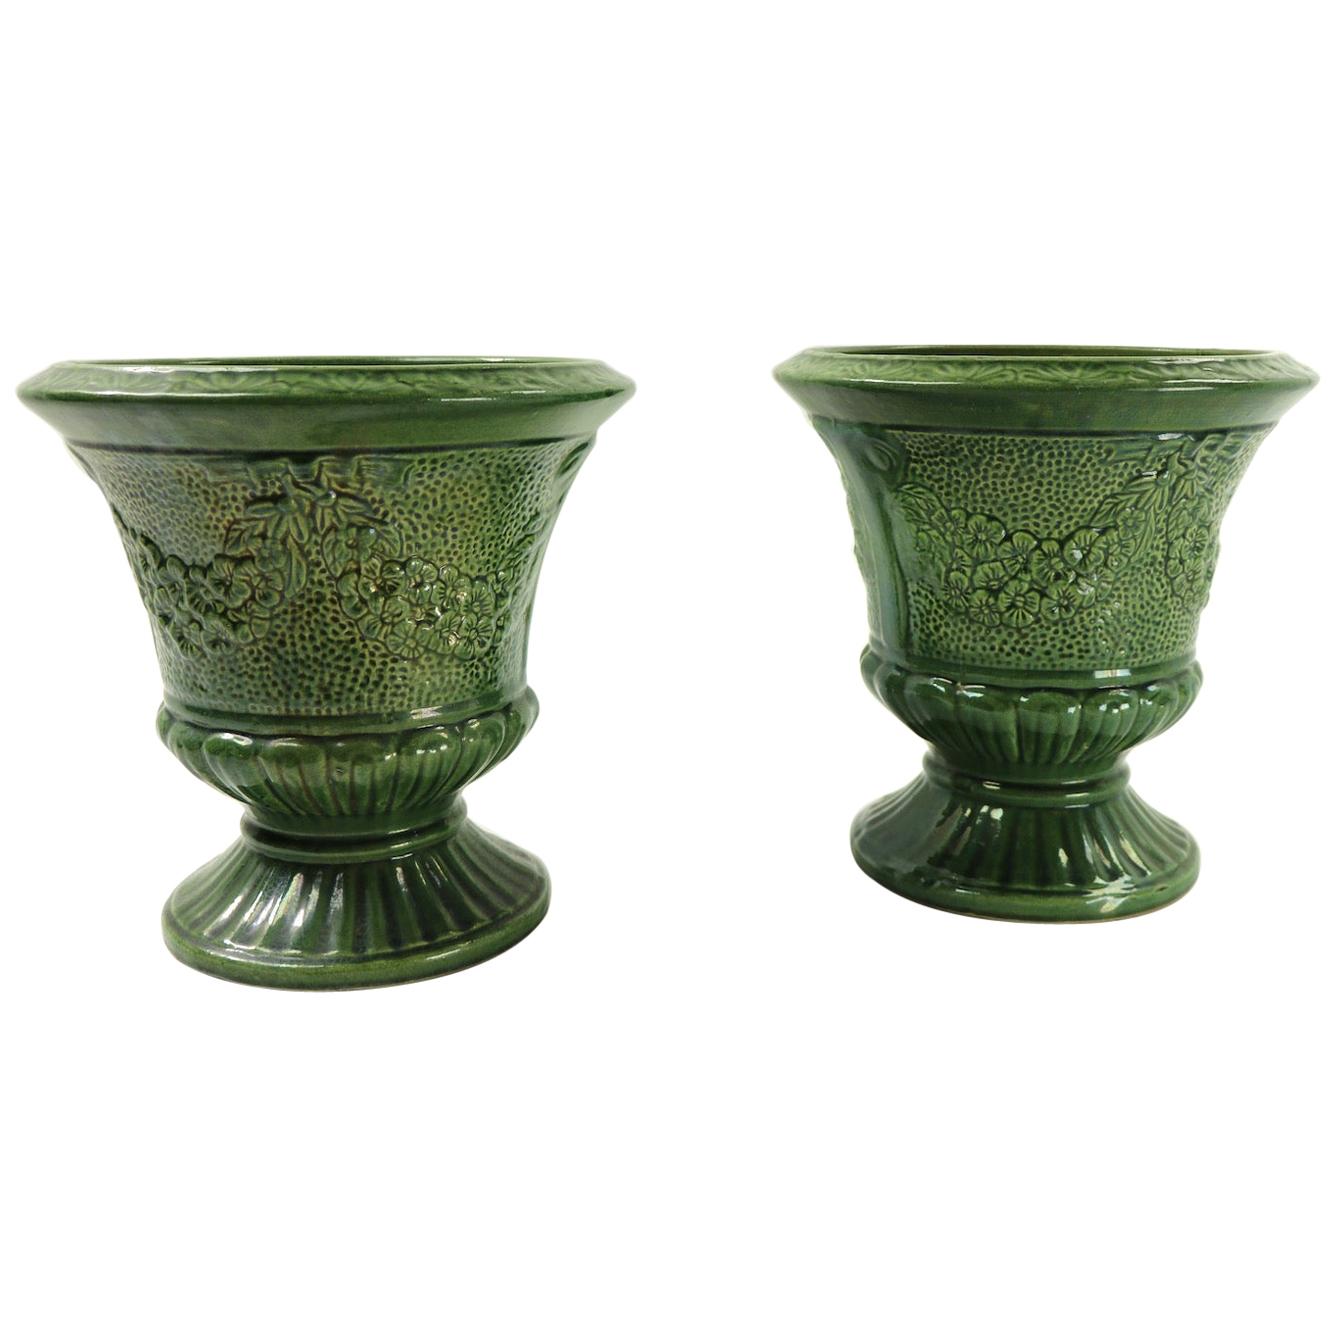 Pair of Pottery Jardinières Planters, Urns, Possibly Zanesville